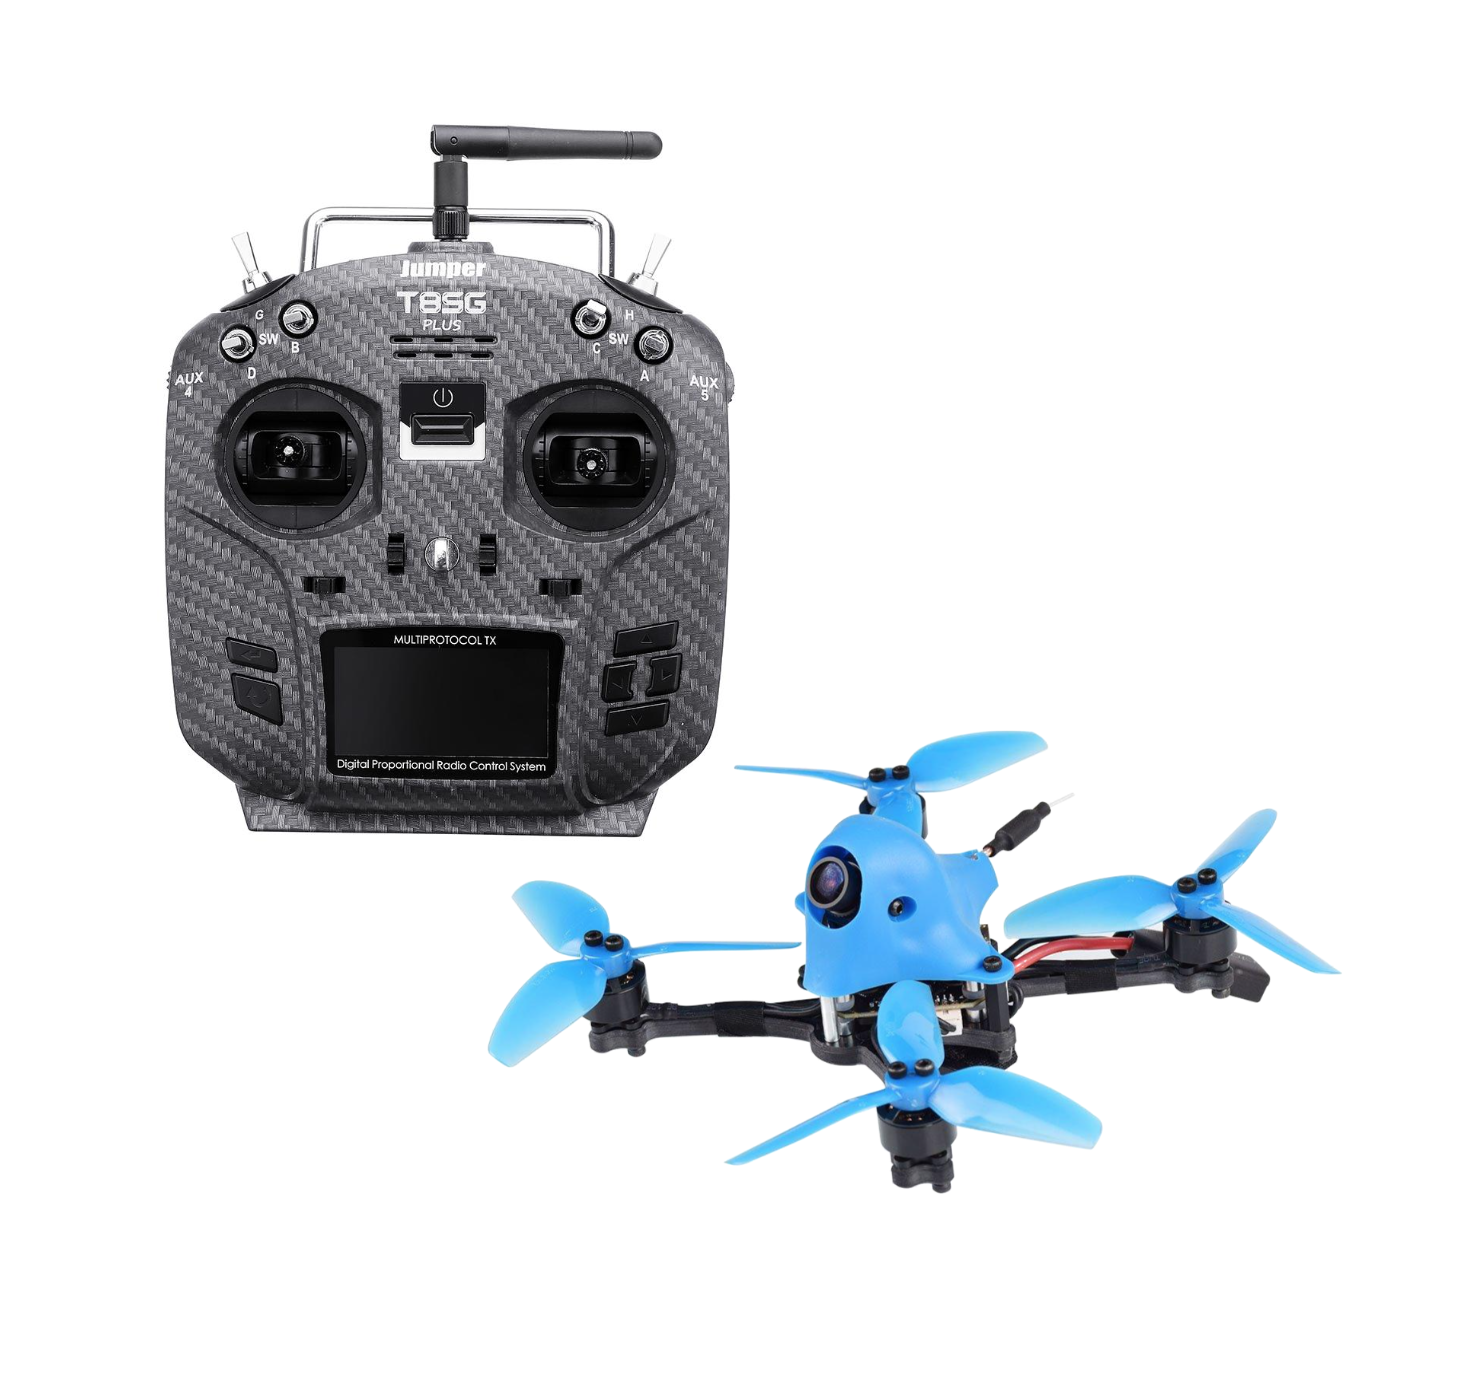 BetaFPV HX115 HD and Jumper T8SG ready to fly bundle